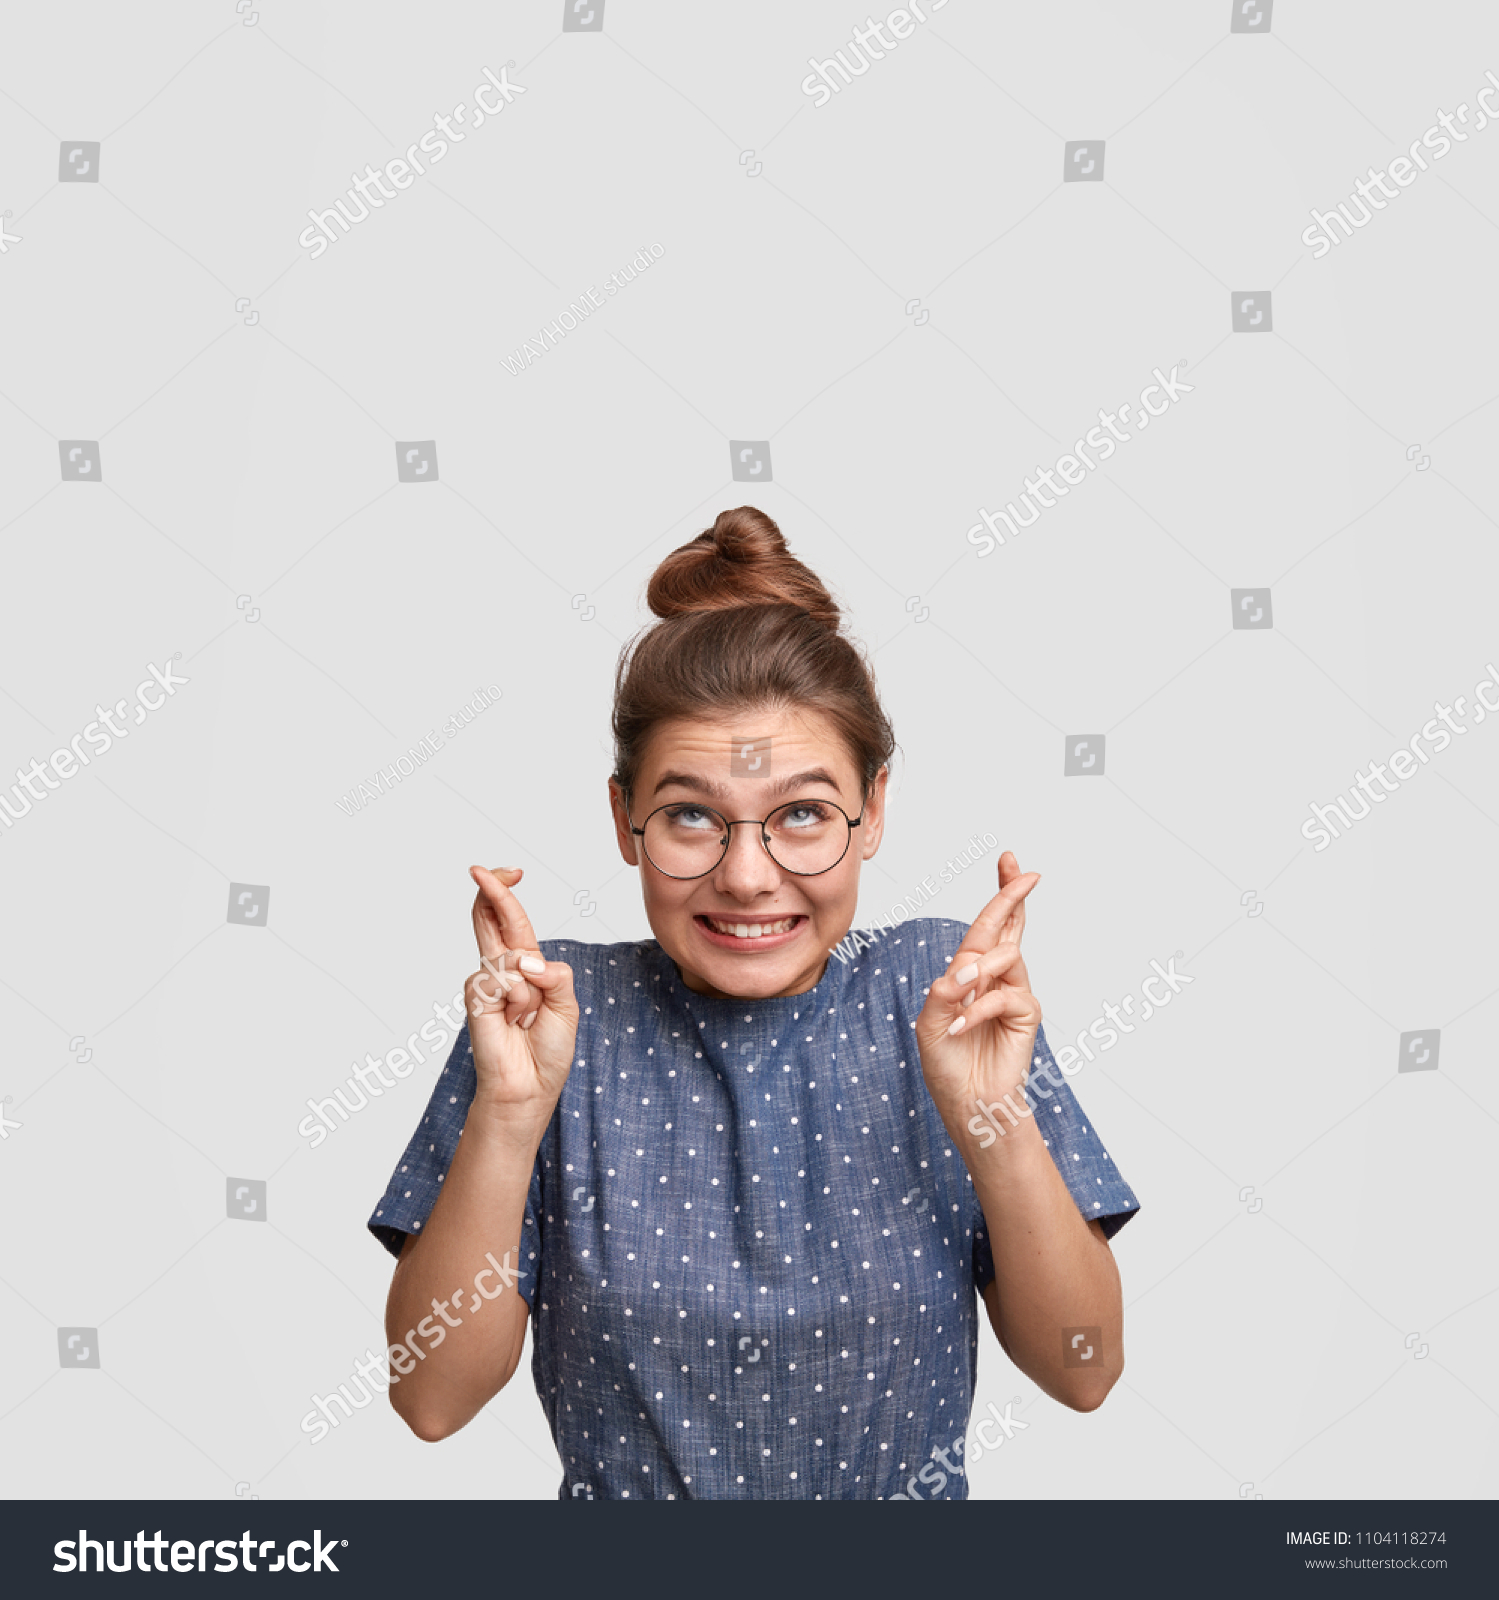 Vertical shot of wishful female sees falling star, crosses fingers as makes desirable wish, looks upwards, prays indoor against white background with blank space for your advertisement or text #1104118274